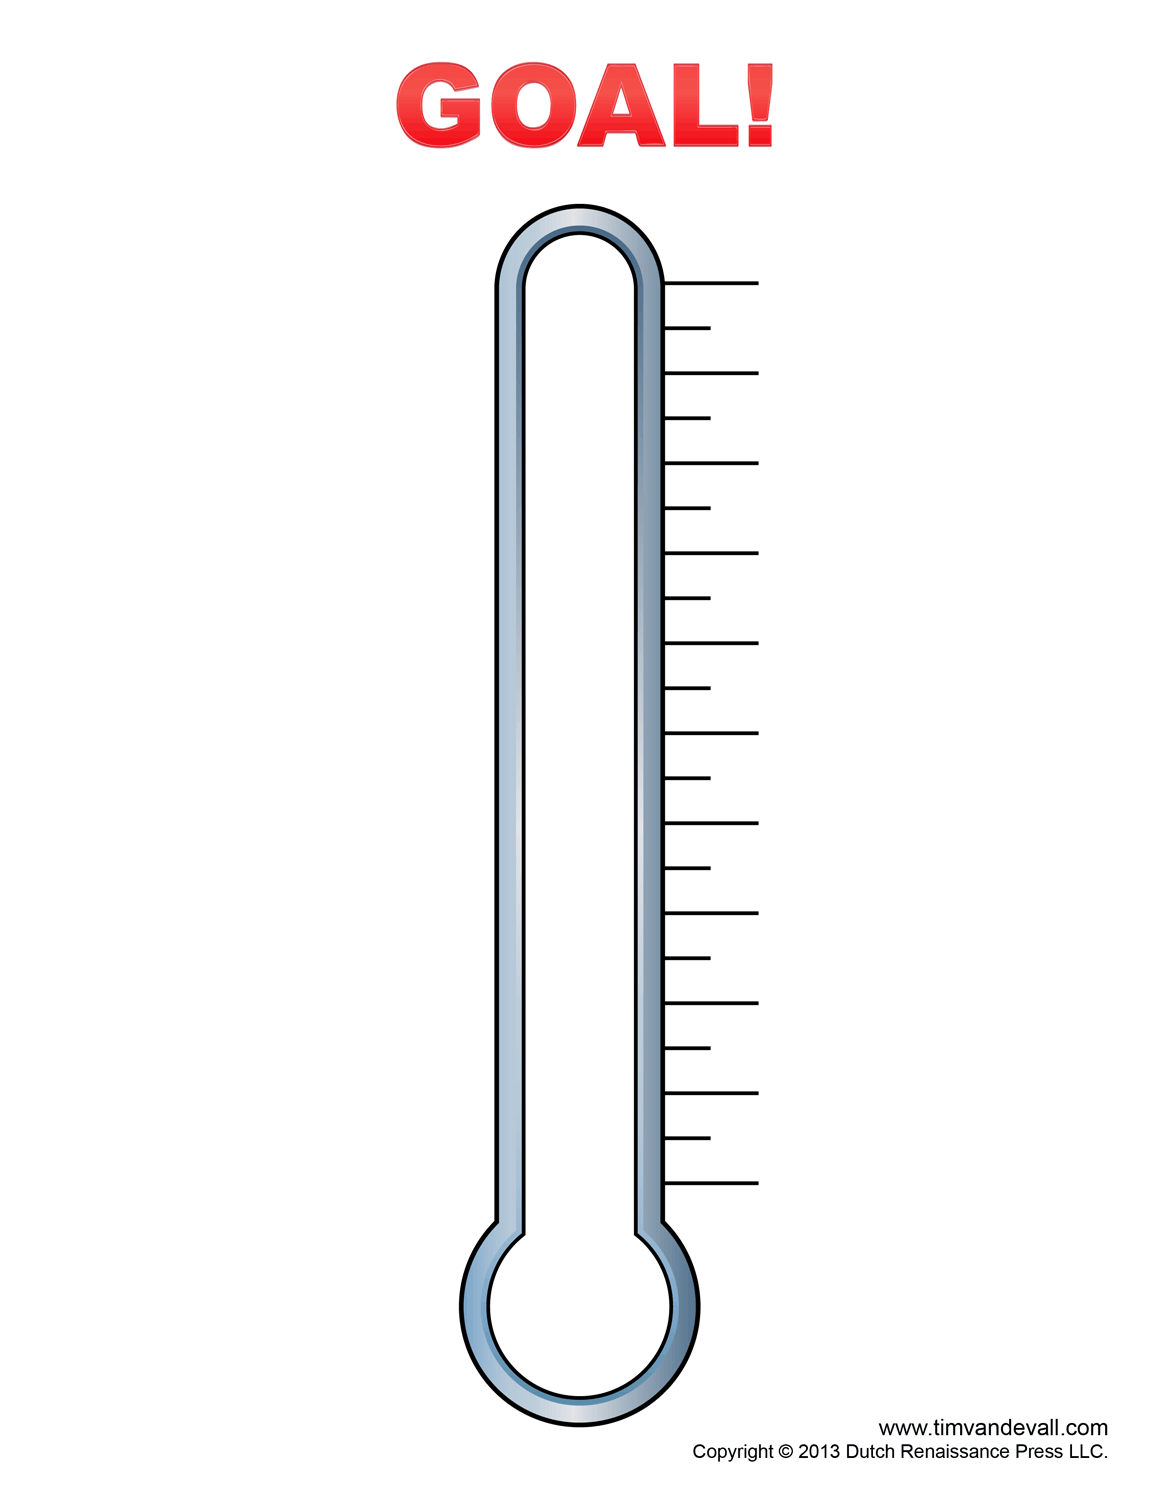 Free Editable Thermometer Template